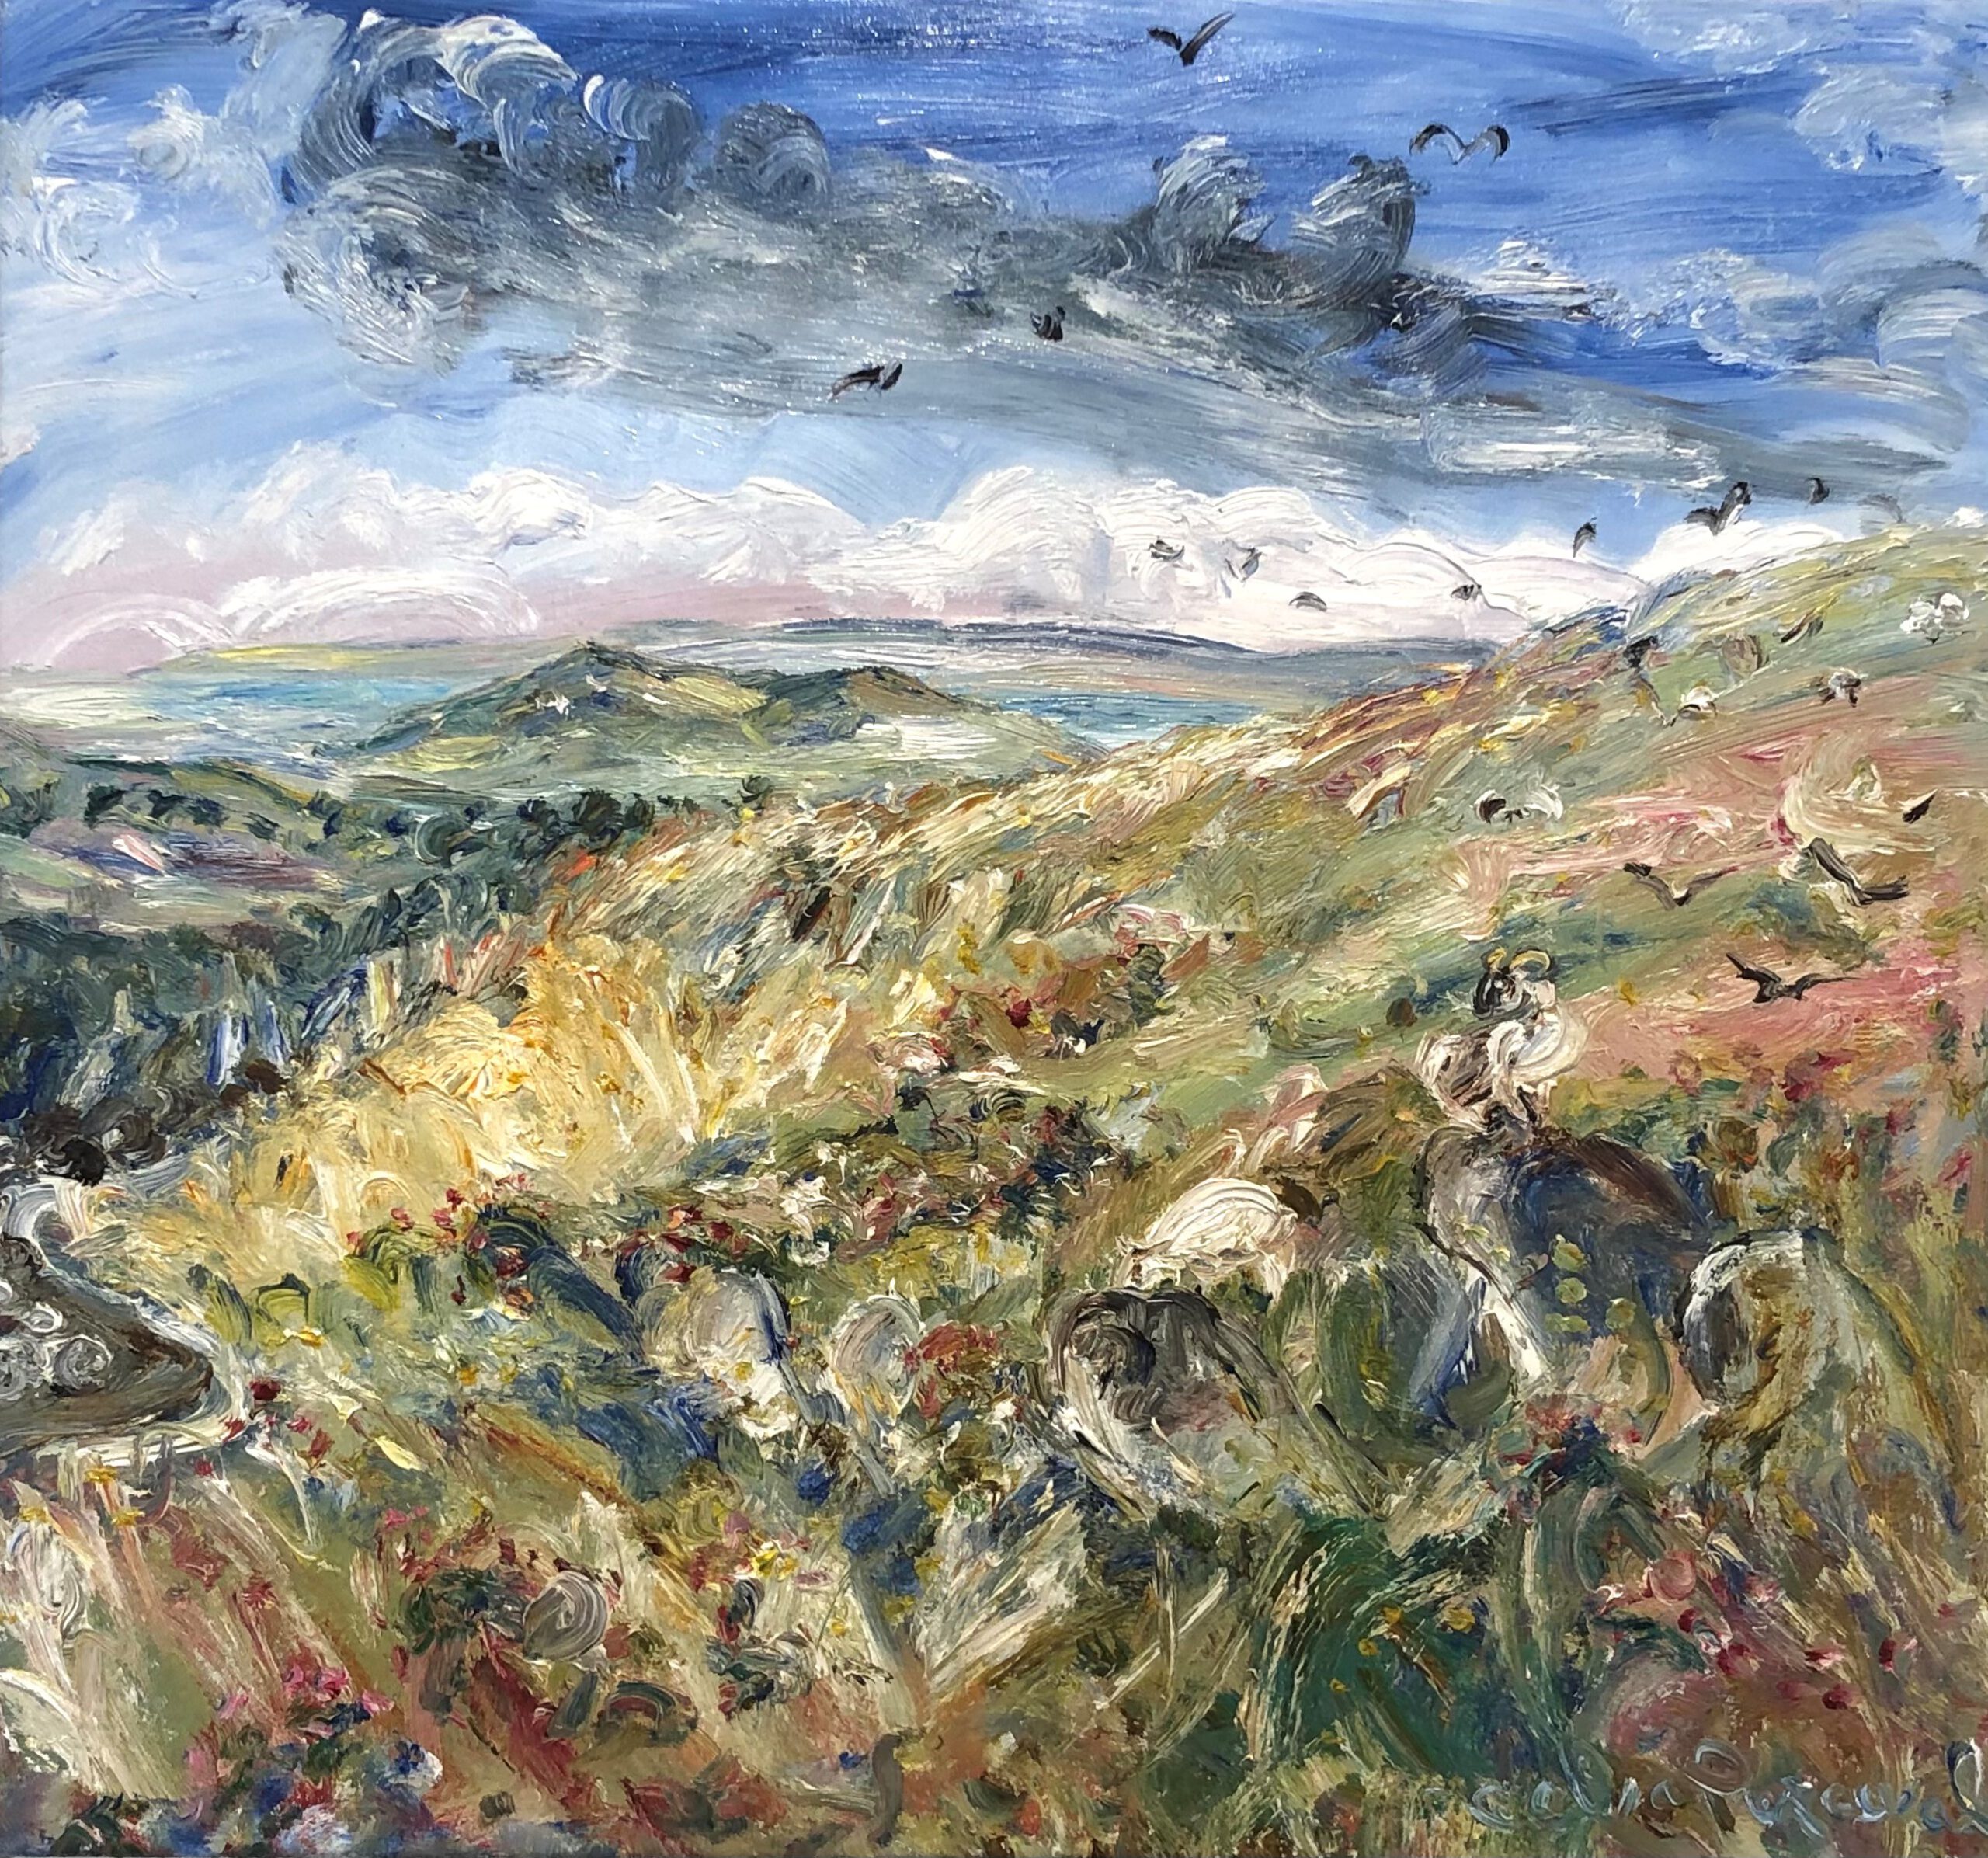 Celia Perceval 'Rock Hillside with Goats Looking Towards Tralee Bay, Ireland' oil on canvas 73 x 80cm $12,000